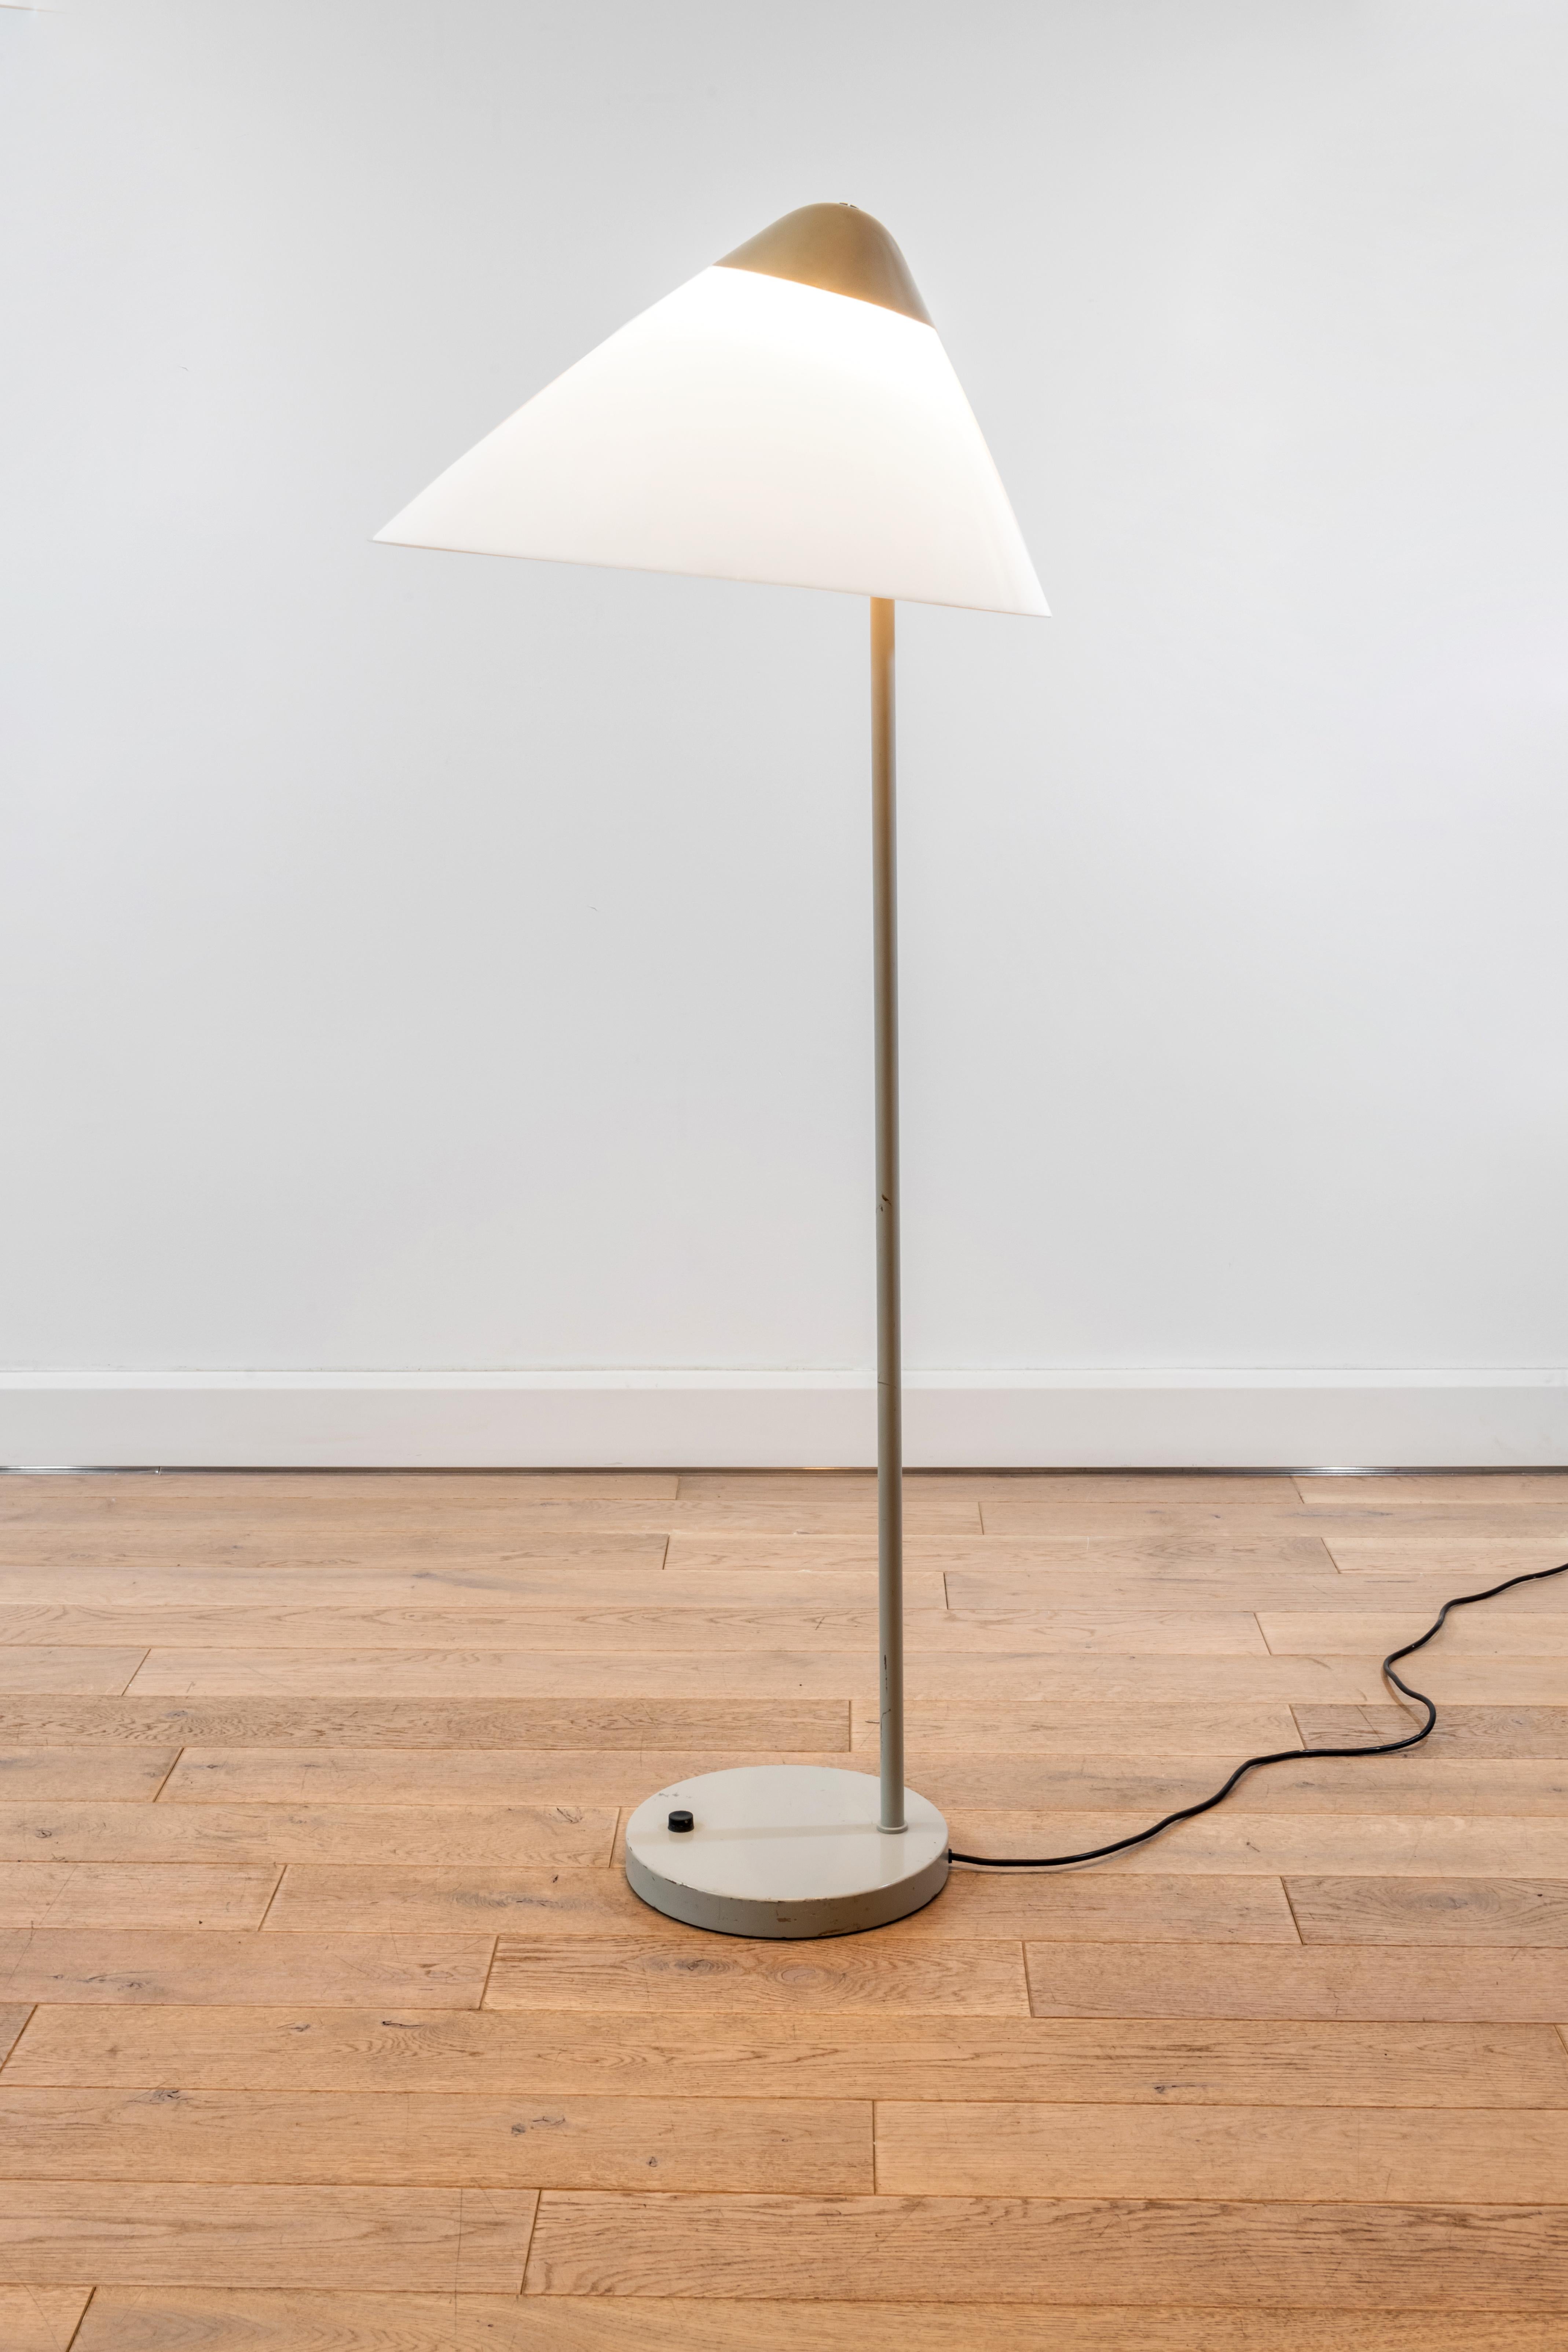 Opala floor lamp designed by Hans Wegner and produced by Louis Poulsen in 1976. The opala floor lamp was originally conceived and designed in 1973 for the decoration project of the Scandinavia Hotel in Copenhagen. However, it was only produced by